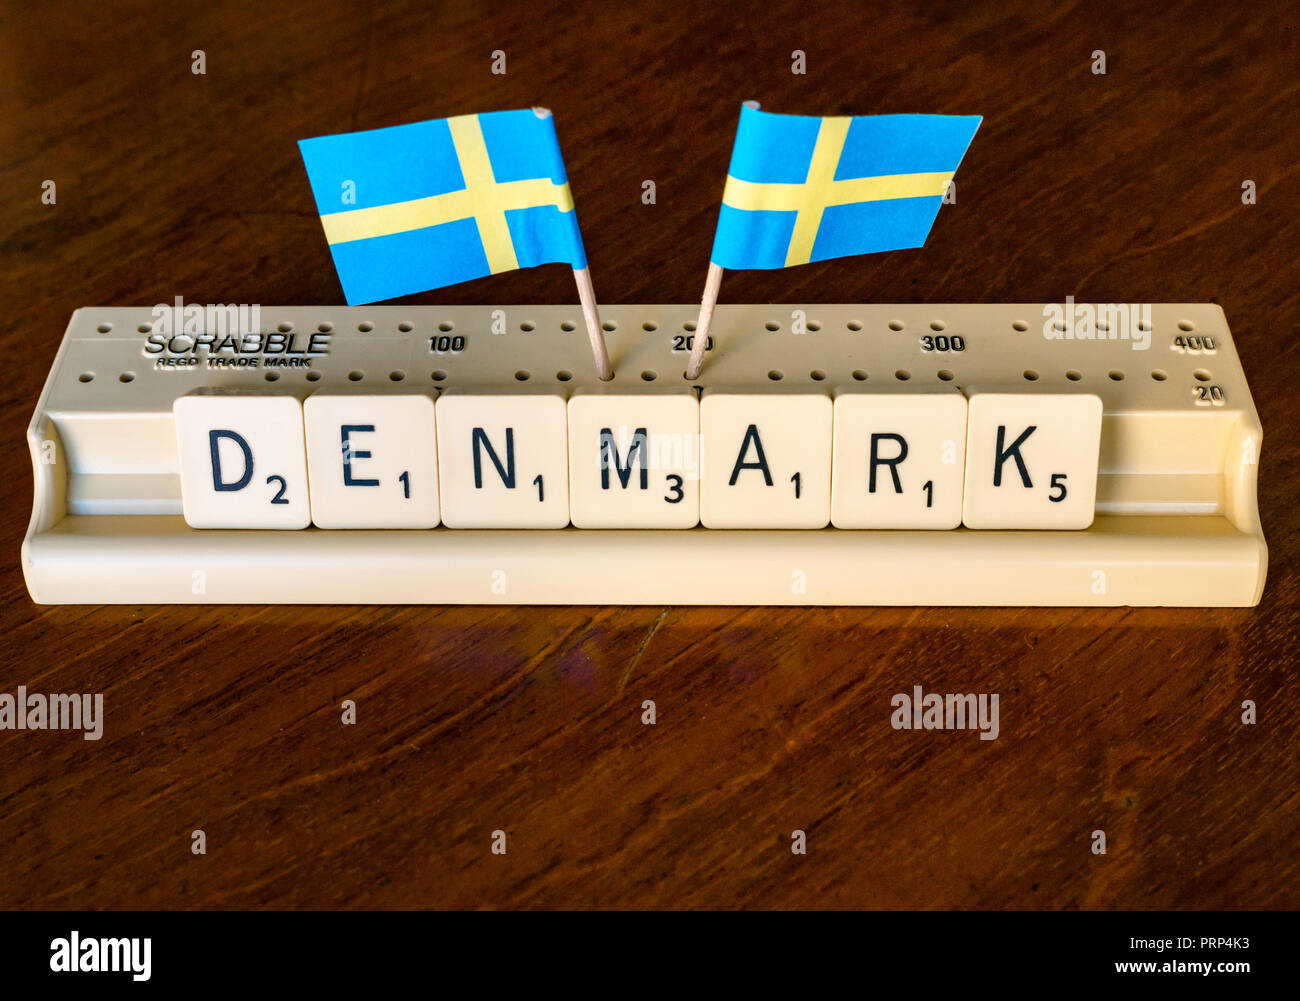 Scrabble letters spelling Denmark in Scrabble tray with Danish flags on dark mahogany background Stock Photo